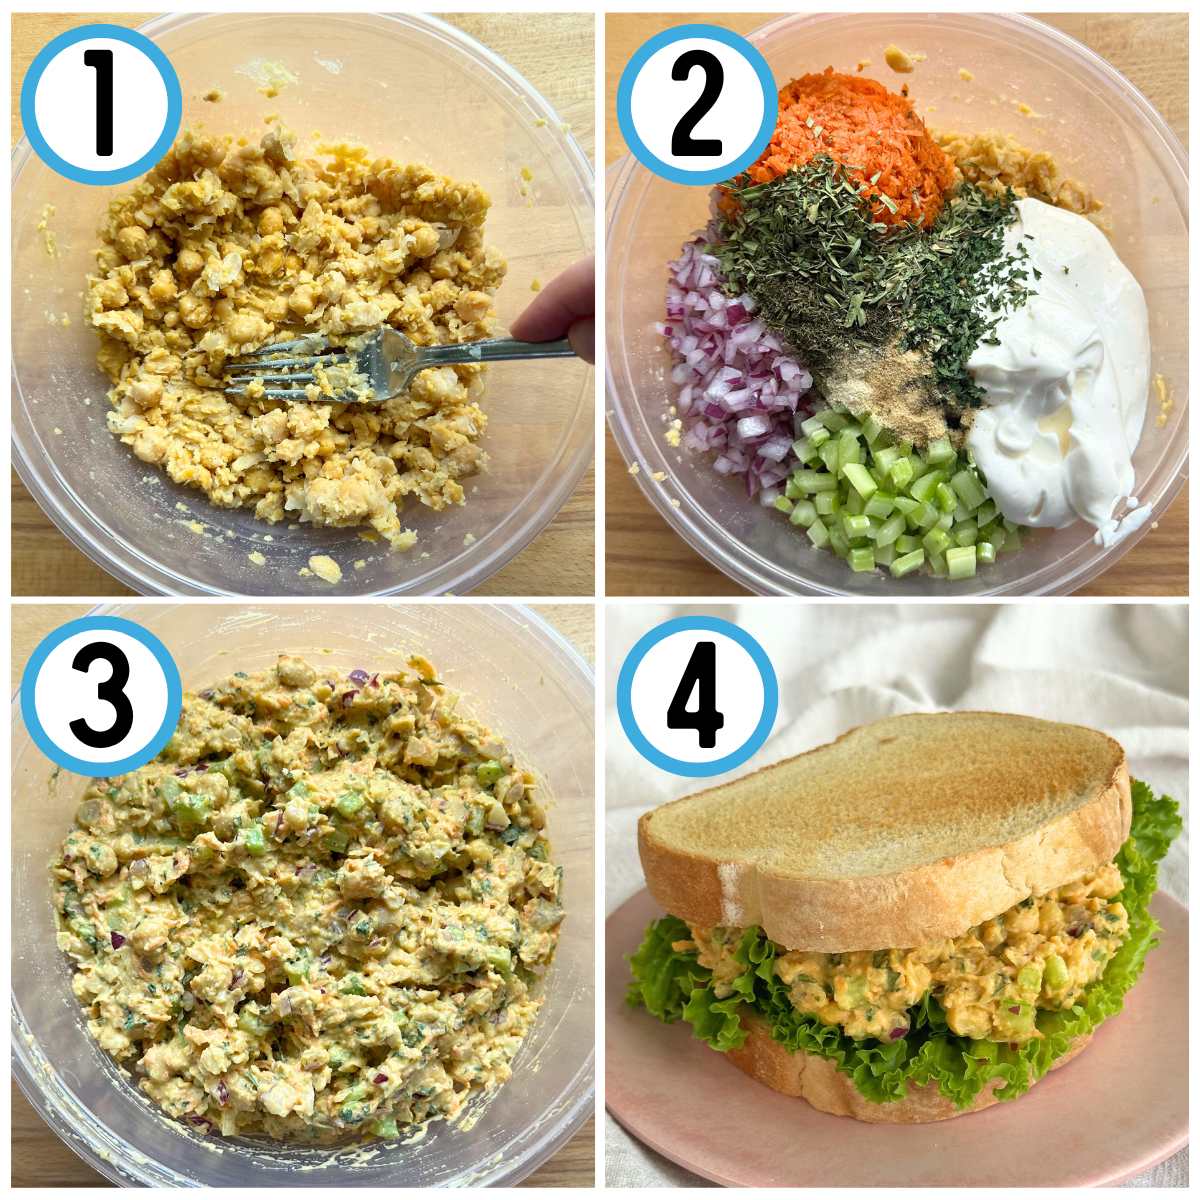 Step by step picture directions for how to make chickpea chicken salad. Step 1 shows mashing chickpeas with a fork in a bowl. Step 2 shows adding all the ingredients to the mashed chickpeas. Step 3 shows the chickpea chicken salad mixture completely combined. Step 4 shows the chickpea chicken salad on a toasted with sandwich with lettuce on top of a pink plate.